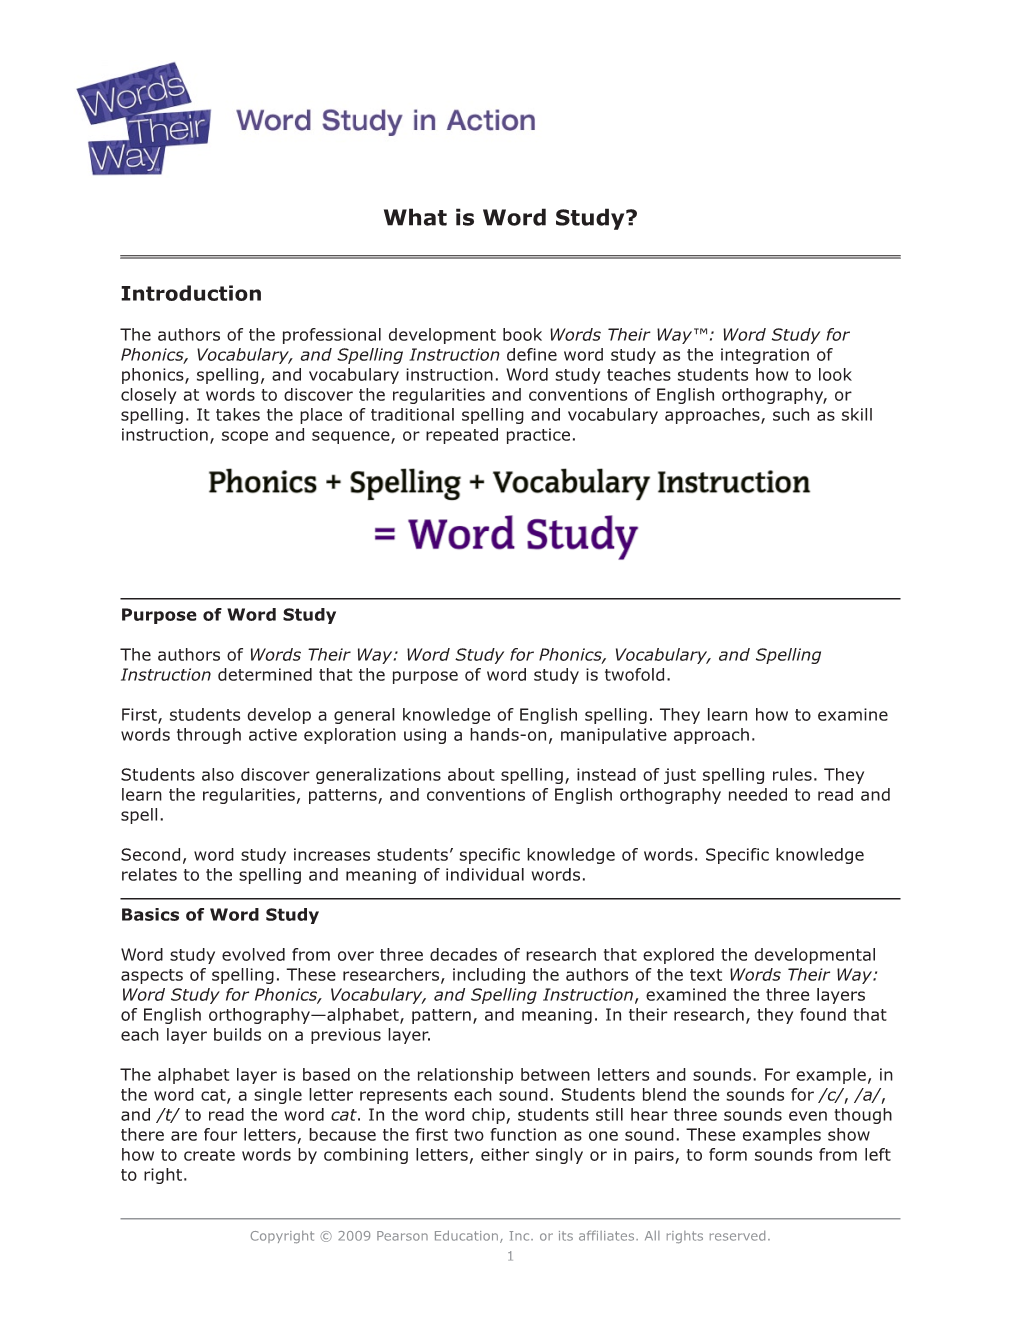 Words Their Way™: Word Study for Phonics, Vocabulary, and Spelling Instruction Define Word Study As the Integration of Phonics, Spelling, and Vocabulary Instruction